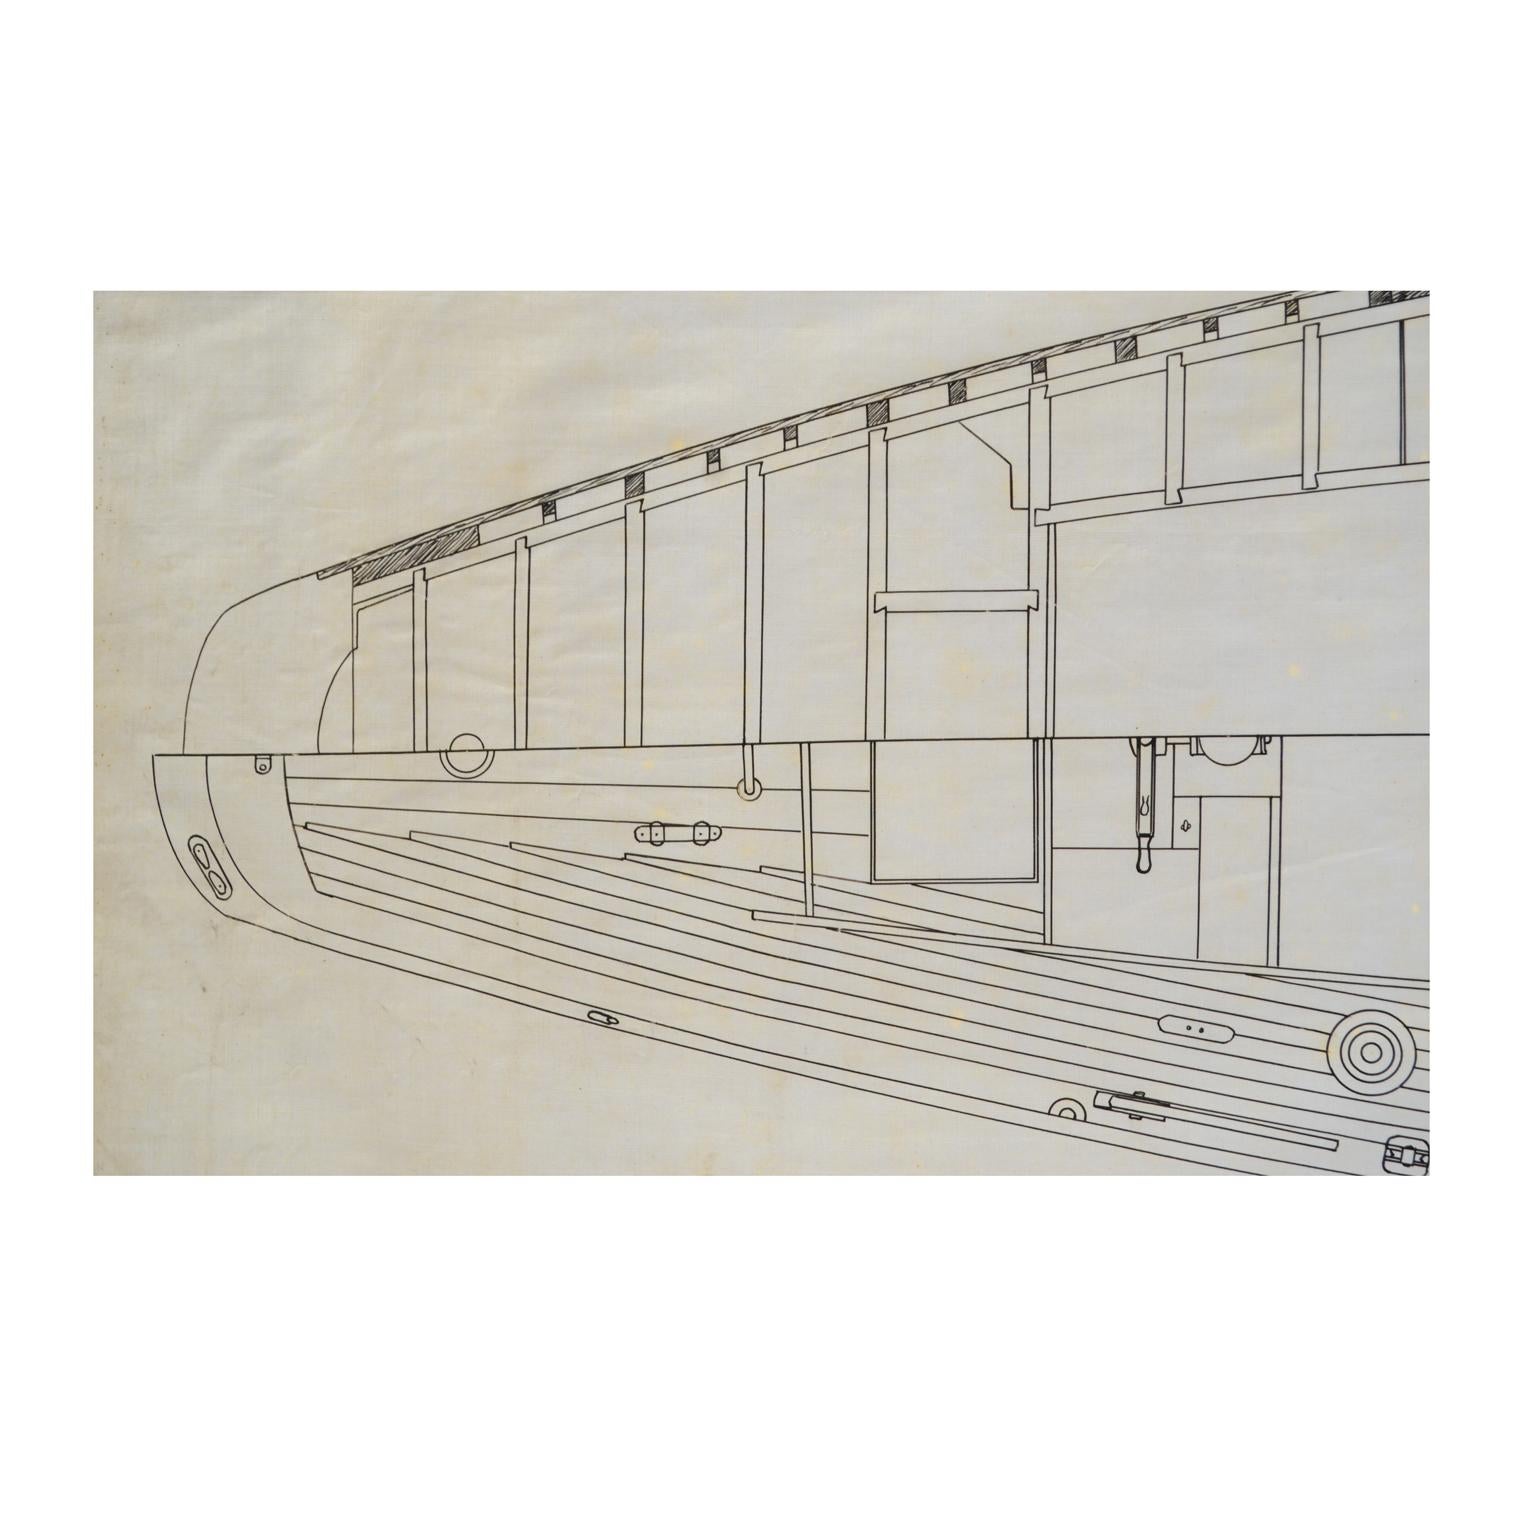 Paper 1949 Nautical Project of the Northele Sailing Boat by Berthon Uffa Fox archives For Sale